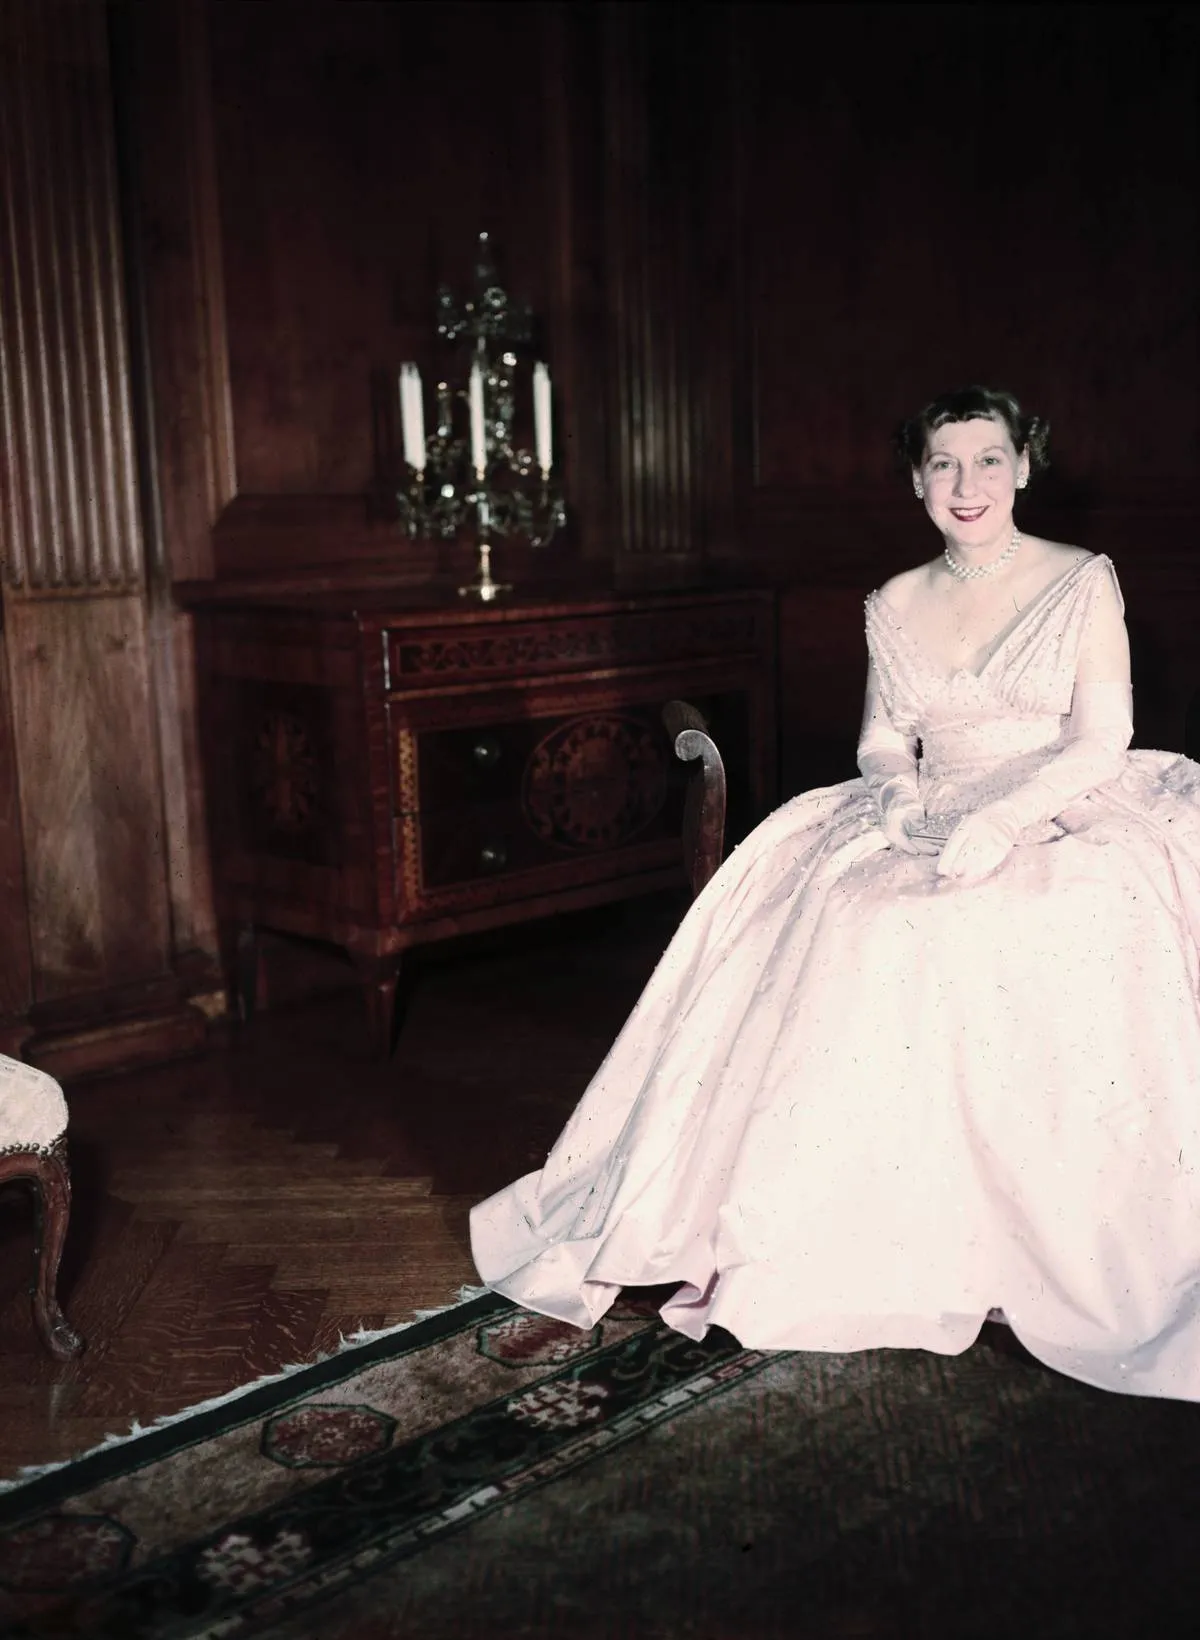 Mamie Eisenhowever sits in her white inaugural ball gown.